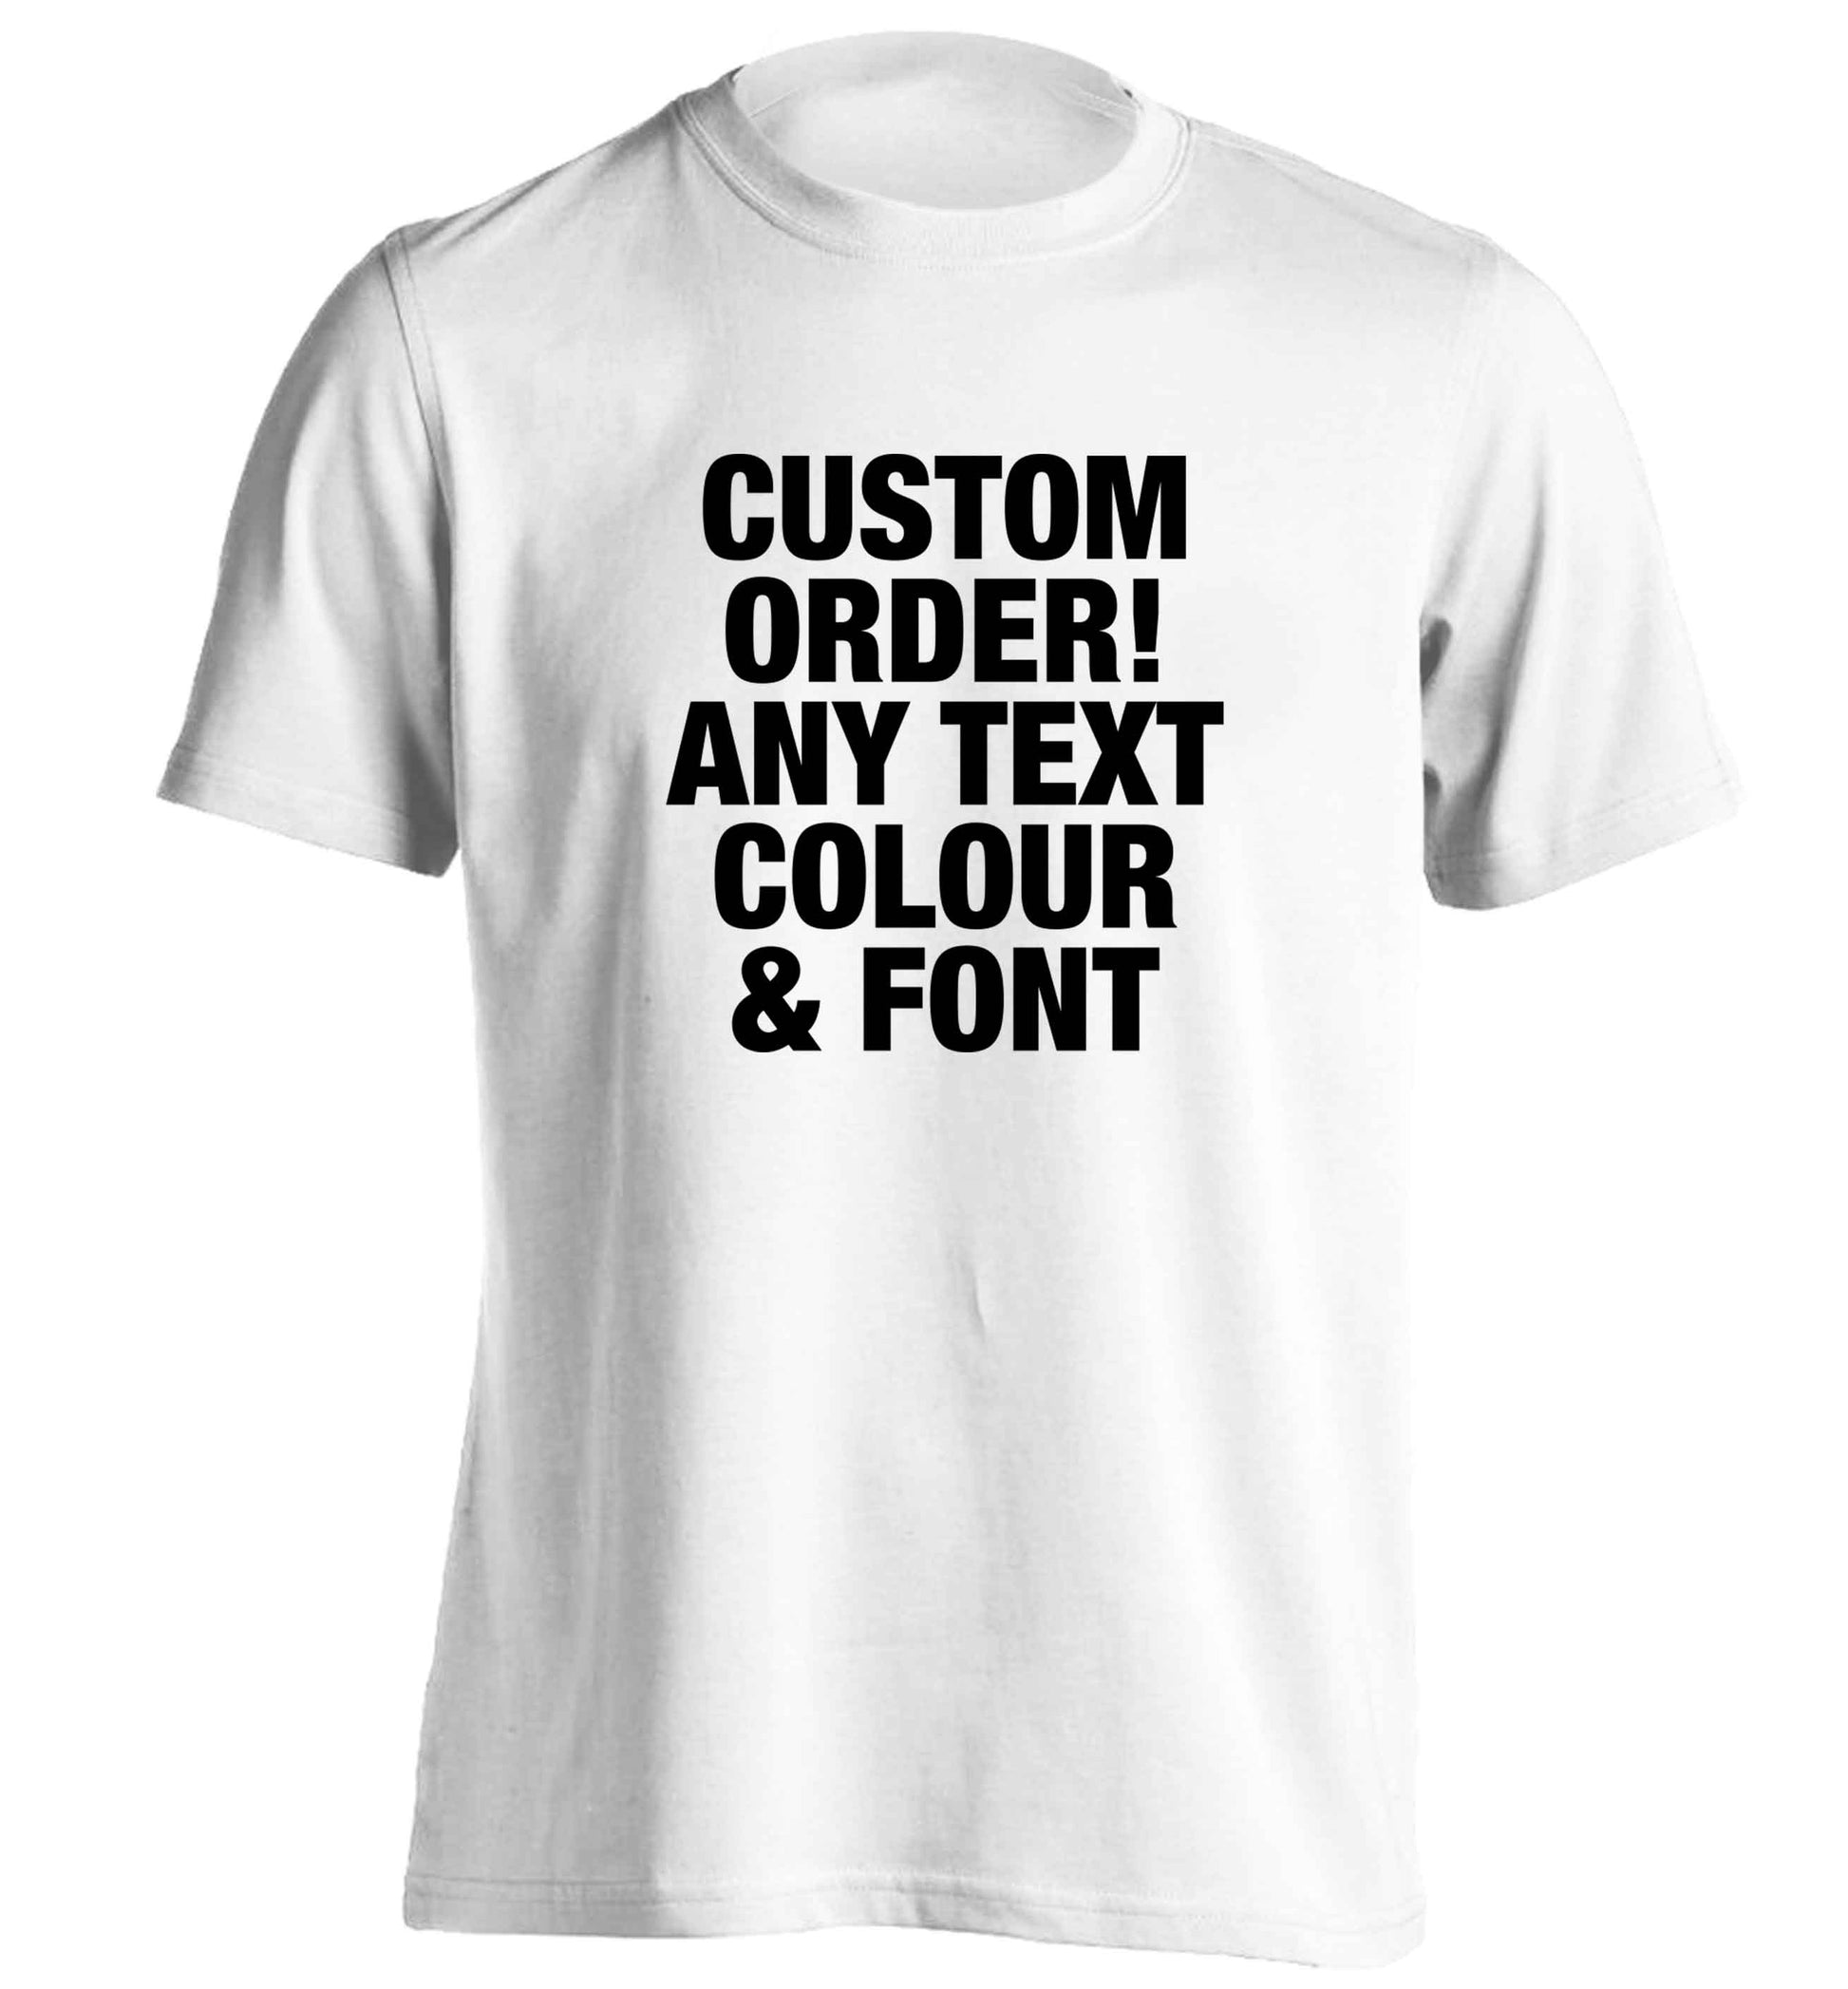 Custom order any text colour and font adults unisex white Tshirt 2XL